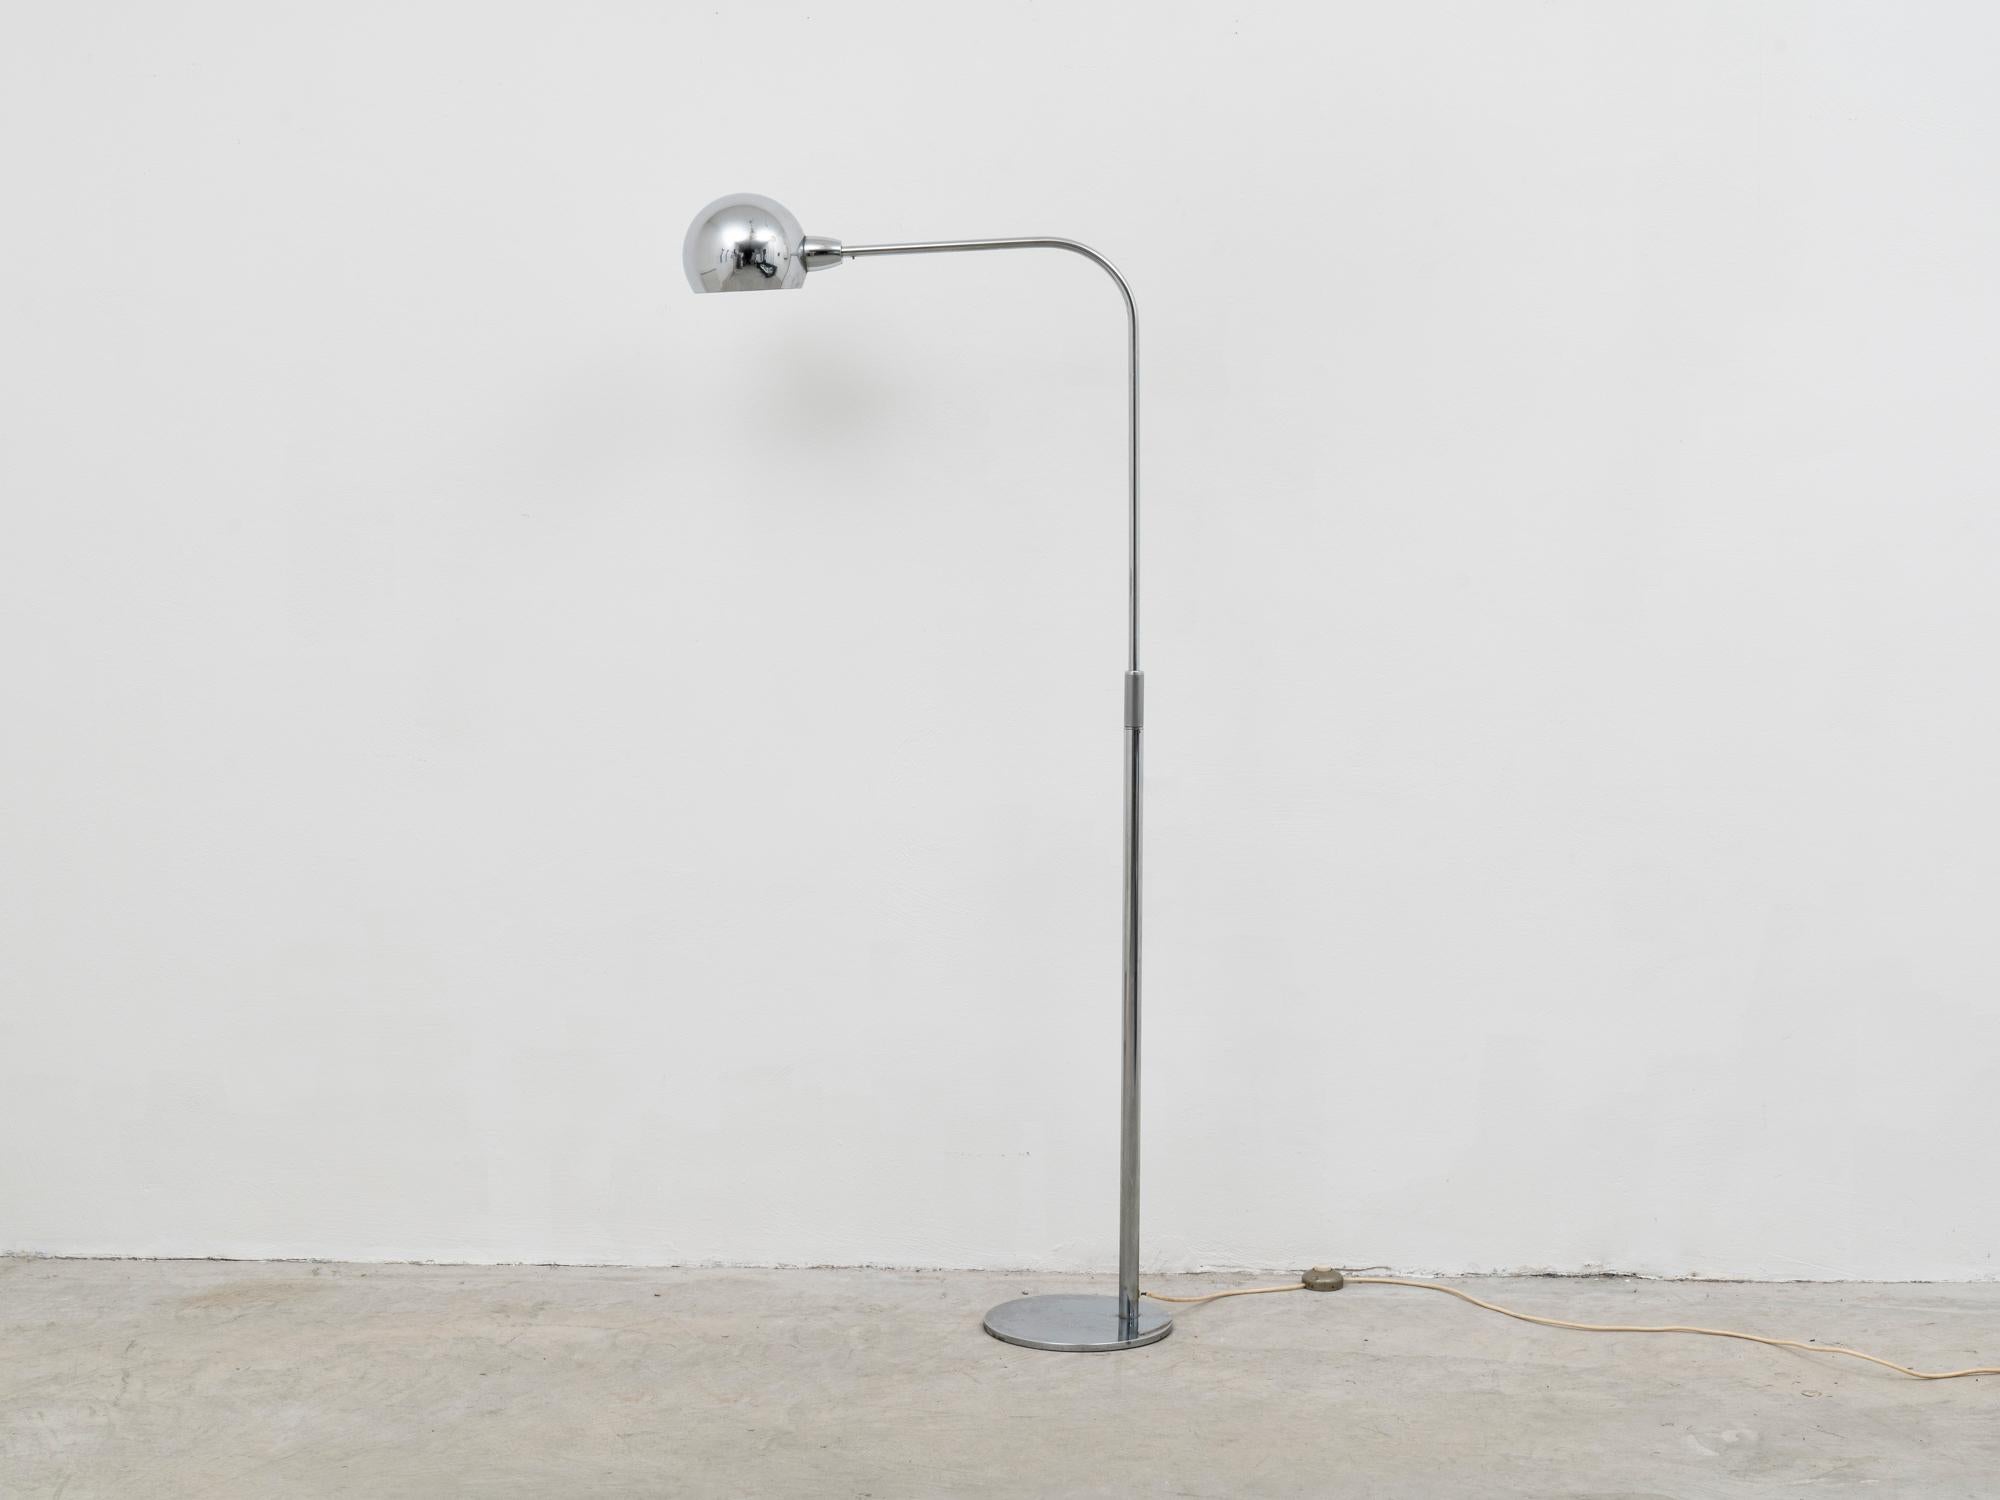 This floor reading lamp was designed by Italian architect Sergio Asti in 1968 and manufactured by Candle as part of the series 